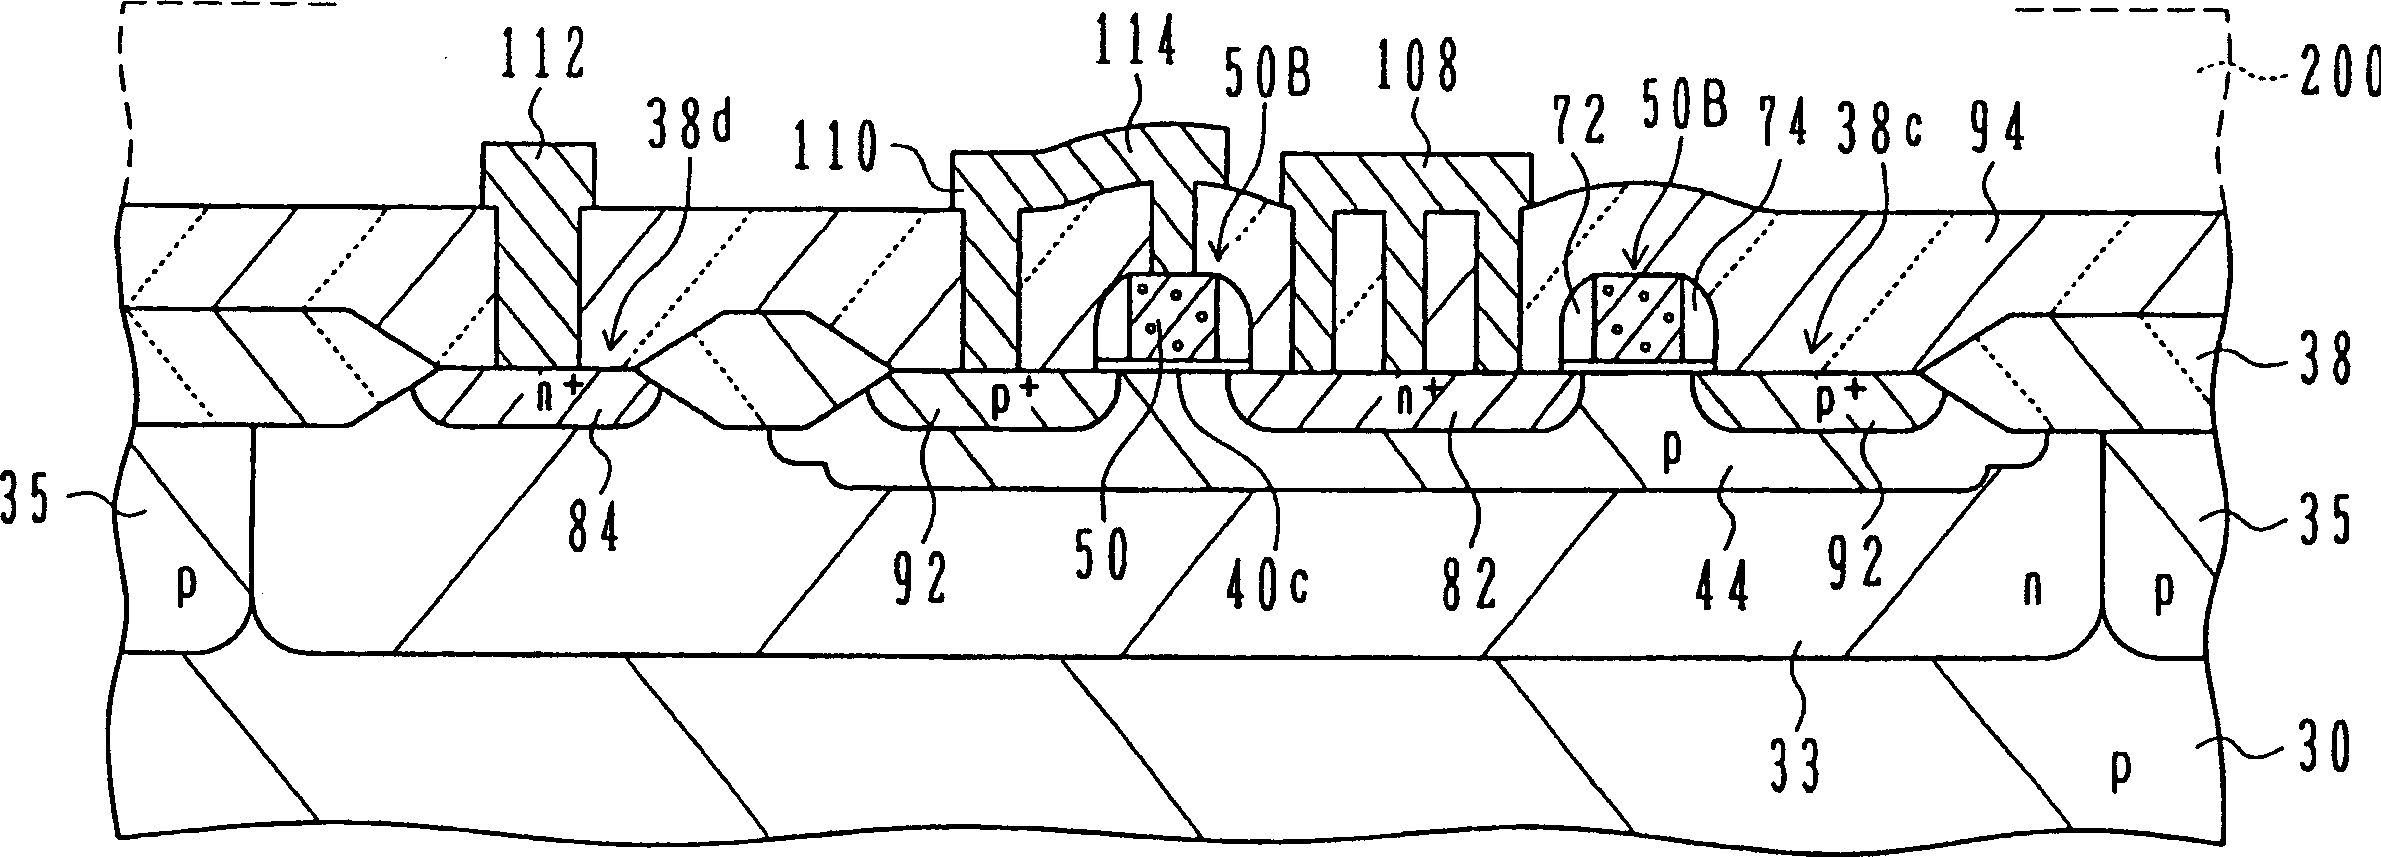 Semiconductor device including bipolar junction transistor with protected emitter-base junction